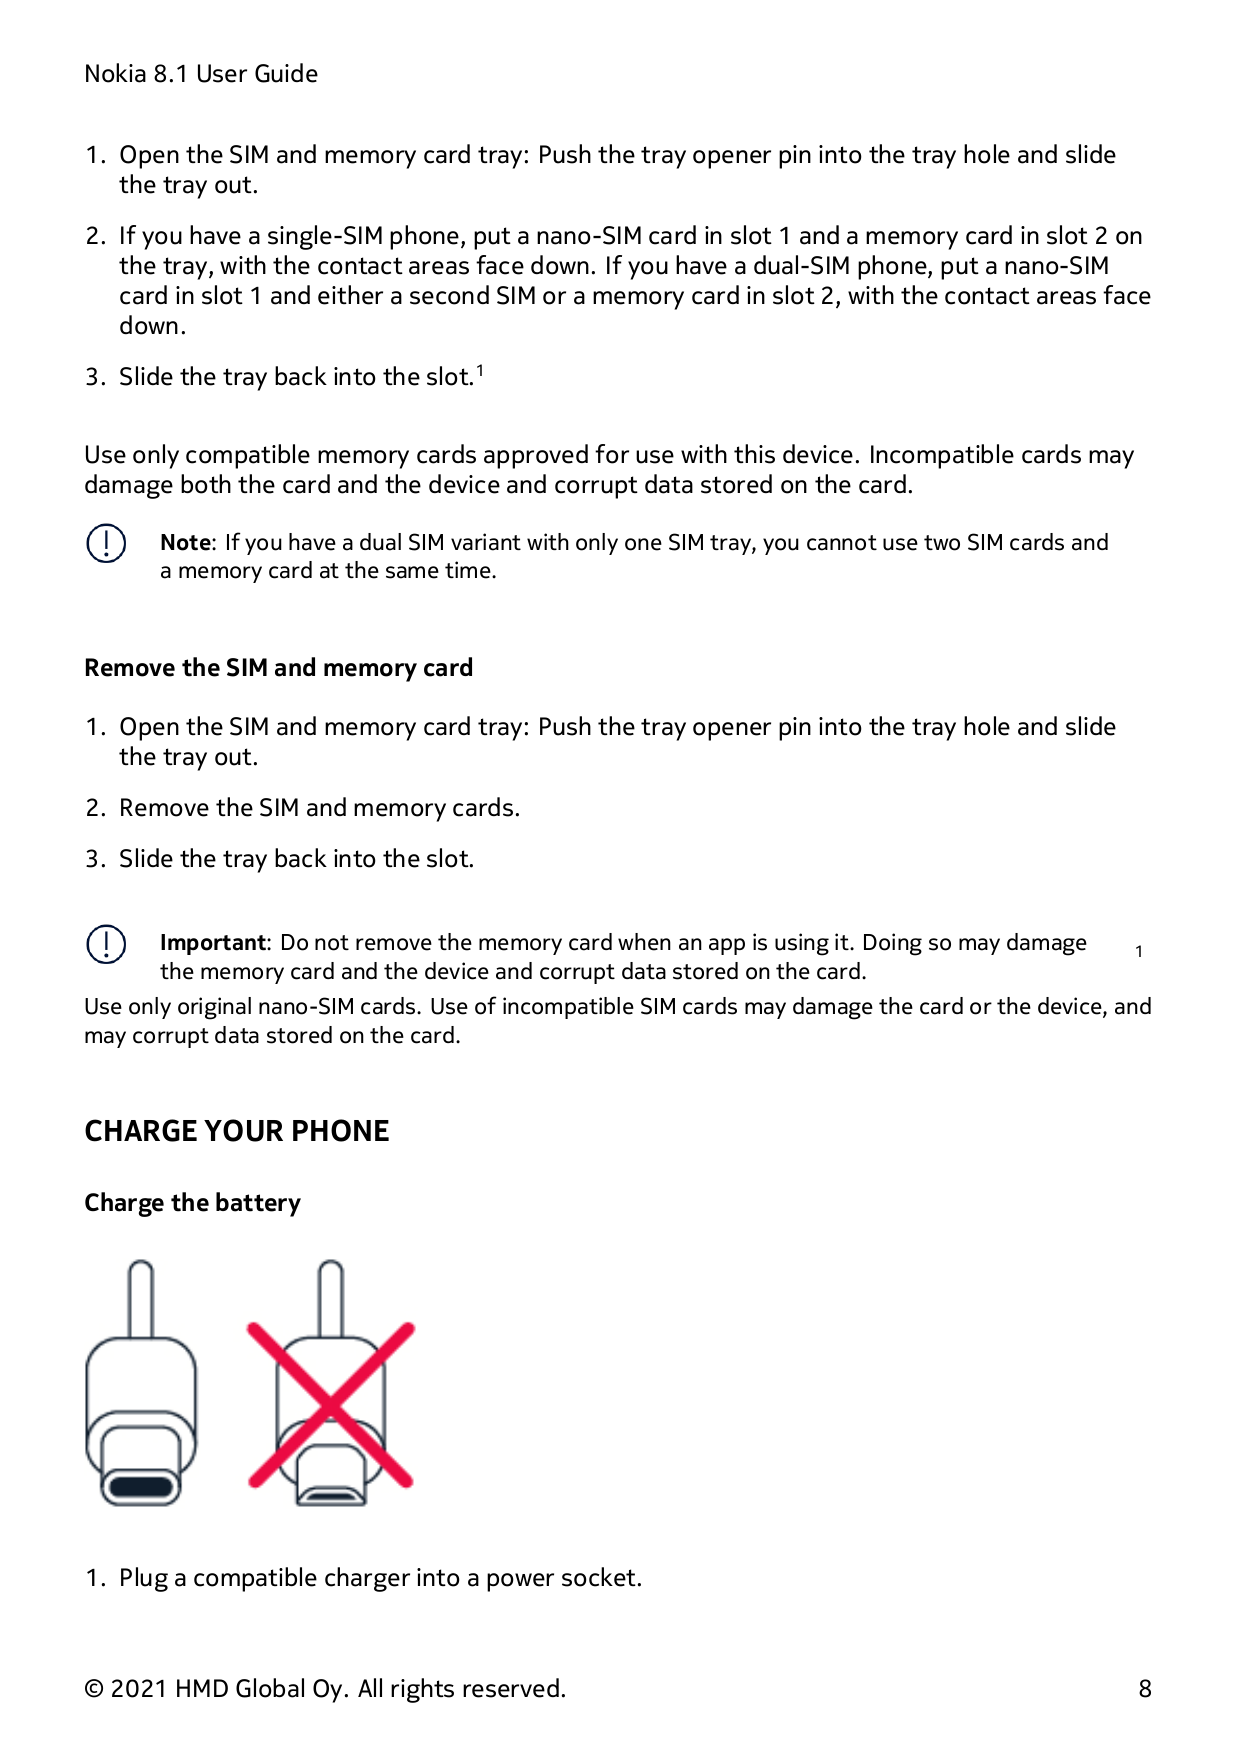 Nokia 8.1 User Guide1. Open the SIM and memory card tray: Push the tray opener pin into the tray hole and slidethe tray out.2. I